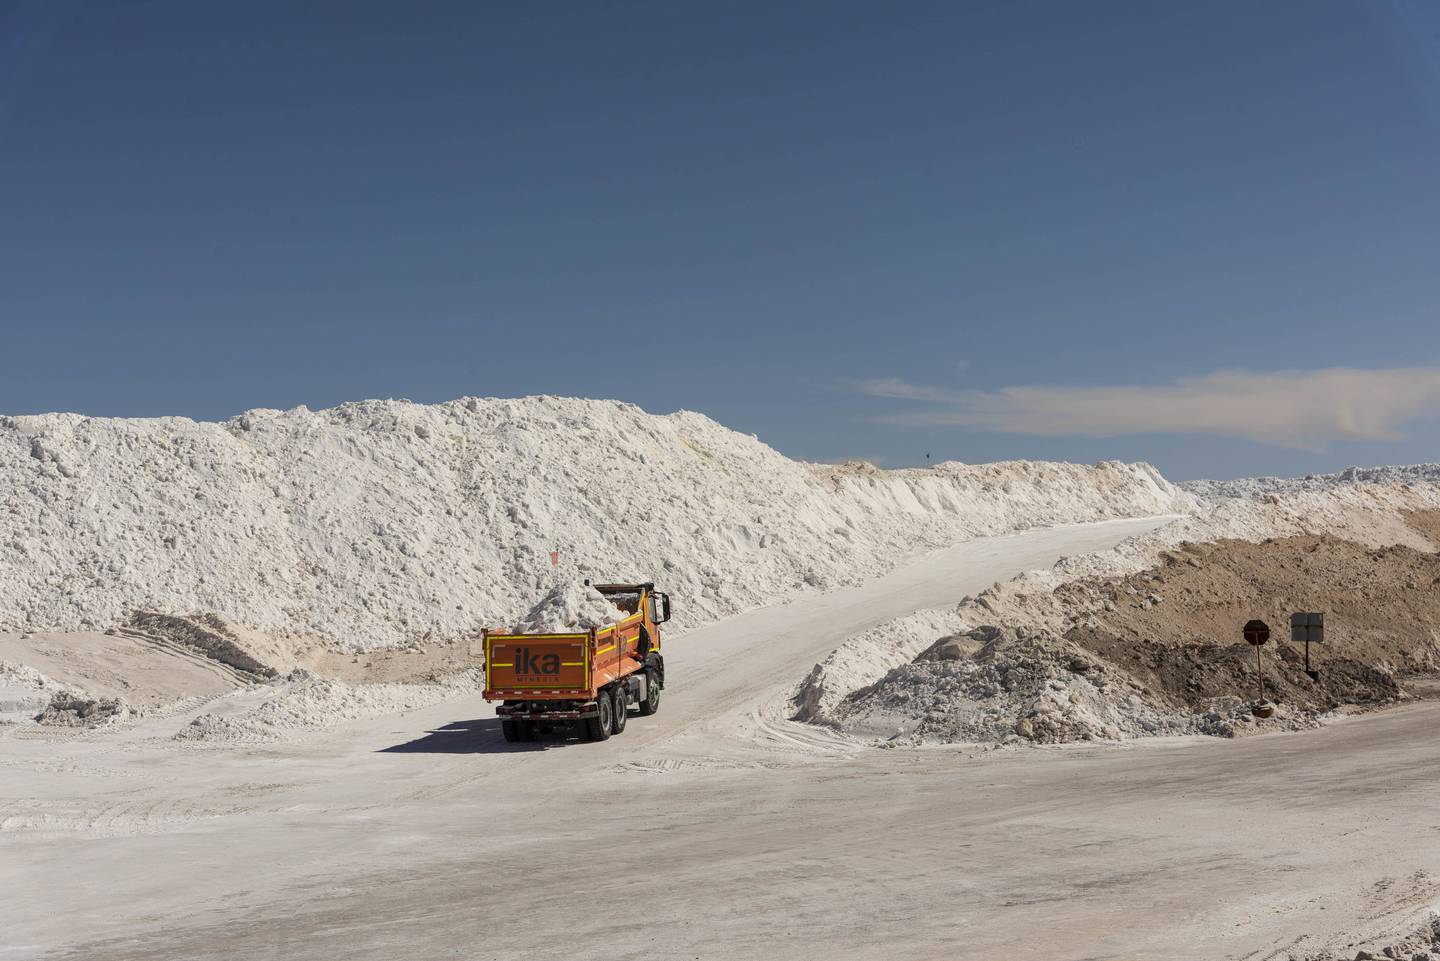 Bolivia is hoping to become a major lithium producer and exporter. Pictured, a lithium mine in Calama, in Chile's Antofagasta region.